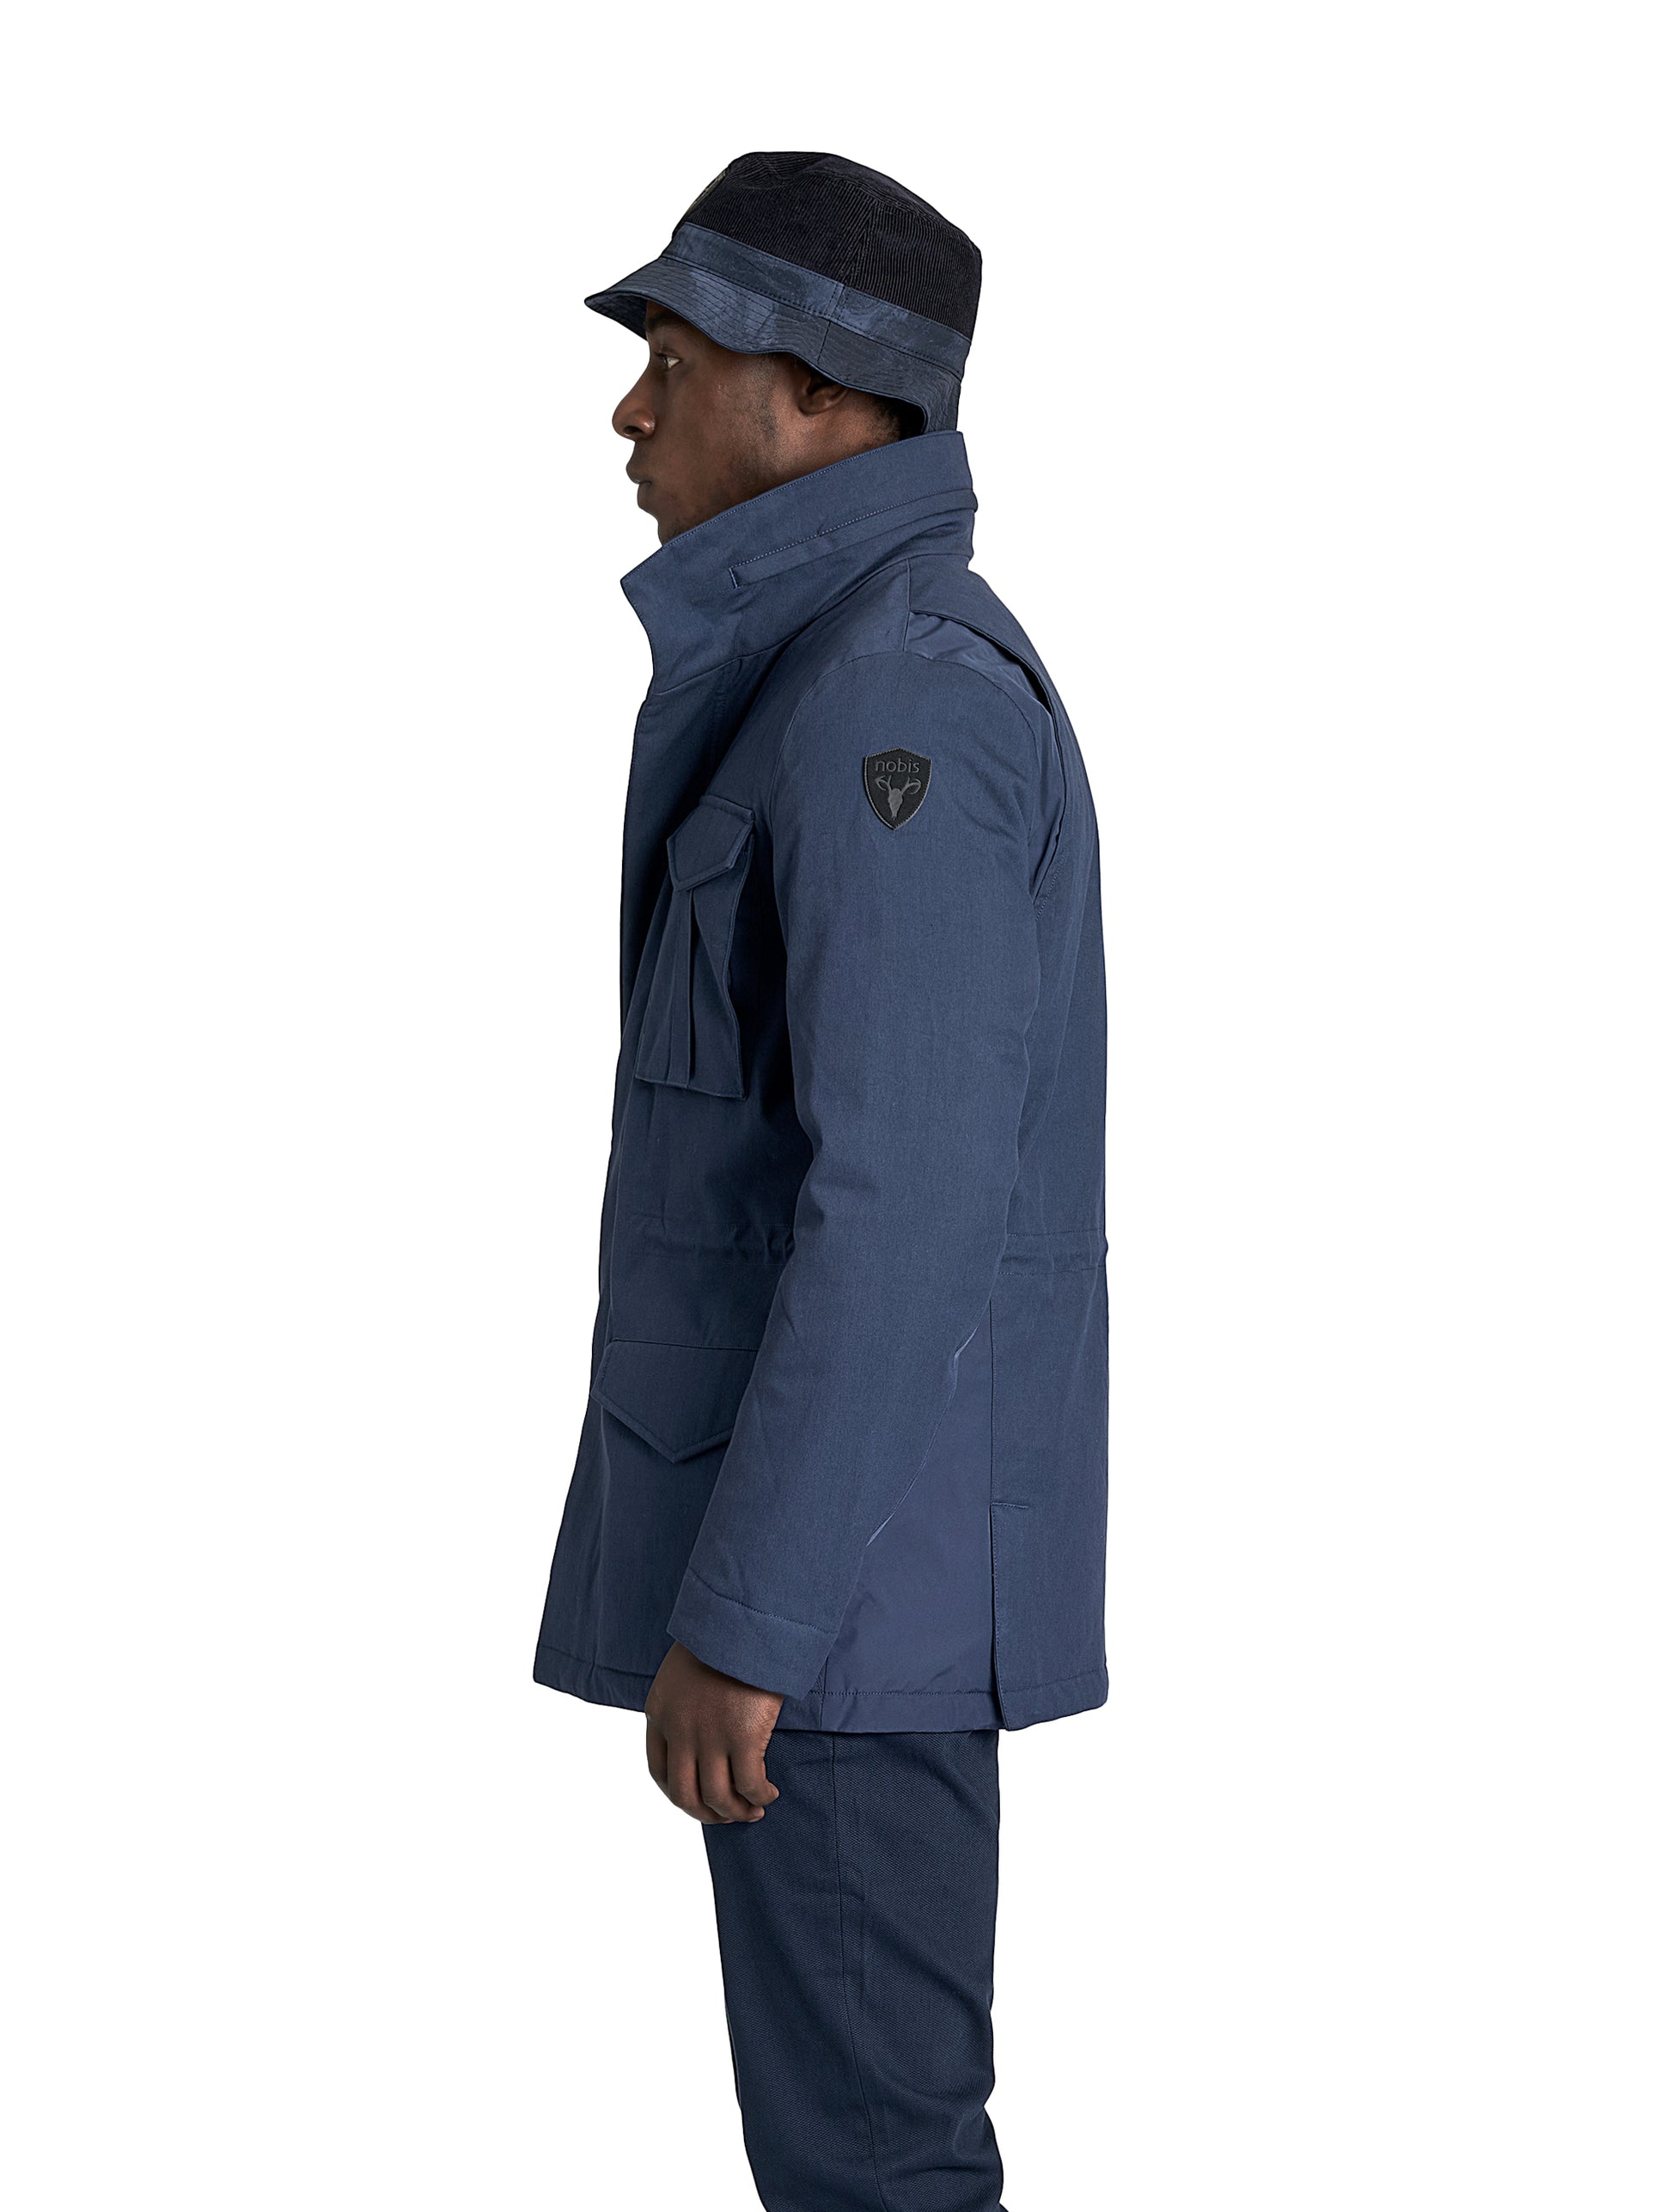 Pelican Men's Tailored Field Jacket in hip length, premium cotton blend and 3-ply micro denier fabrication, Premium Canadian origin White Duck Down insulation, tuck away, waterproof hood in premium cire technical nylon taffeta, two-way centre-front zipper with magnetic wind flap, pit zipper vents, magnetic closure chest and waist flap pockets, hidden adjustable waist drawcord, and action back detailing, in Navy